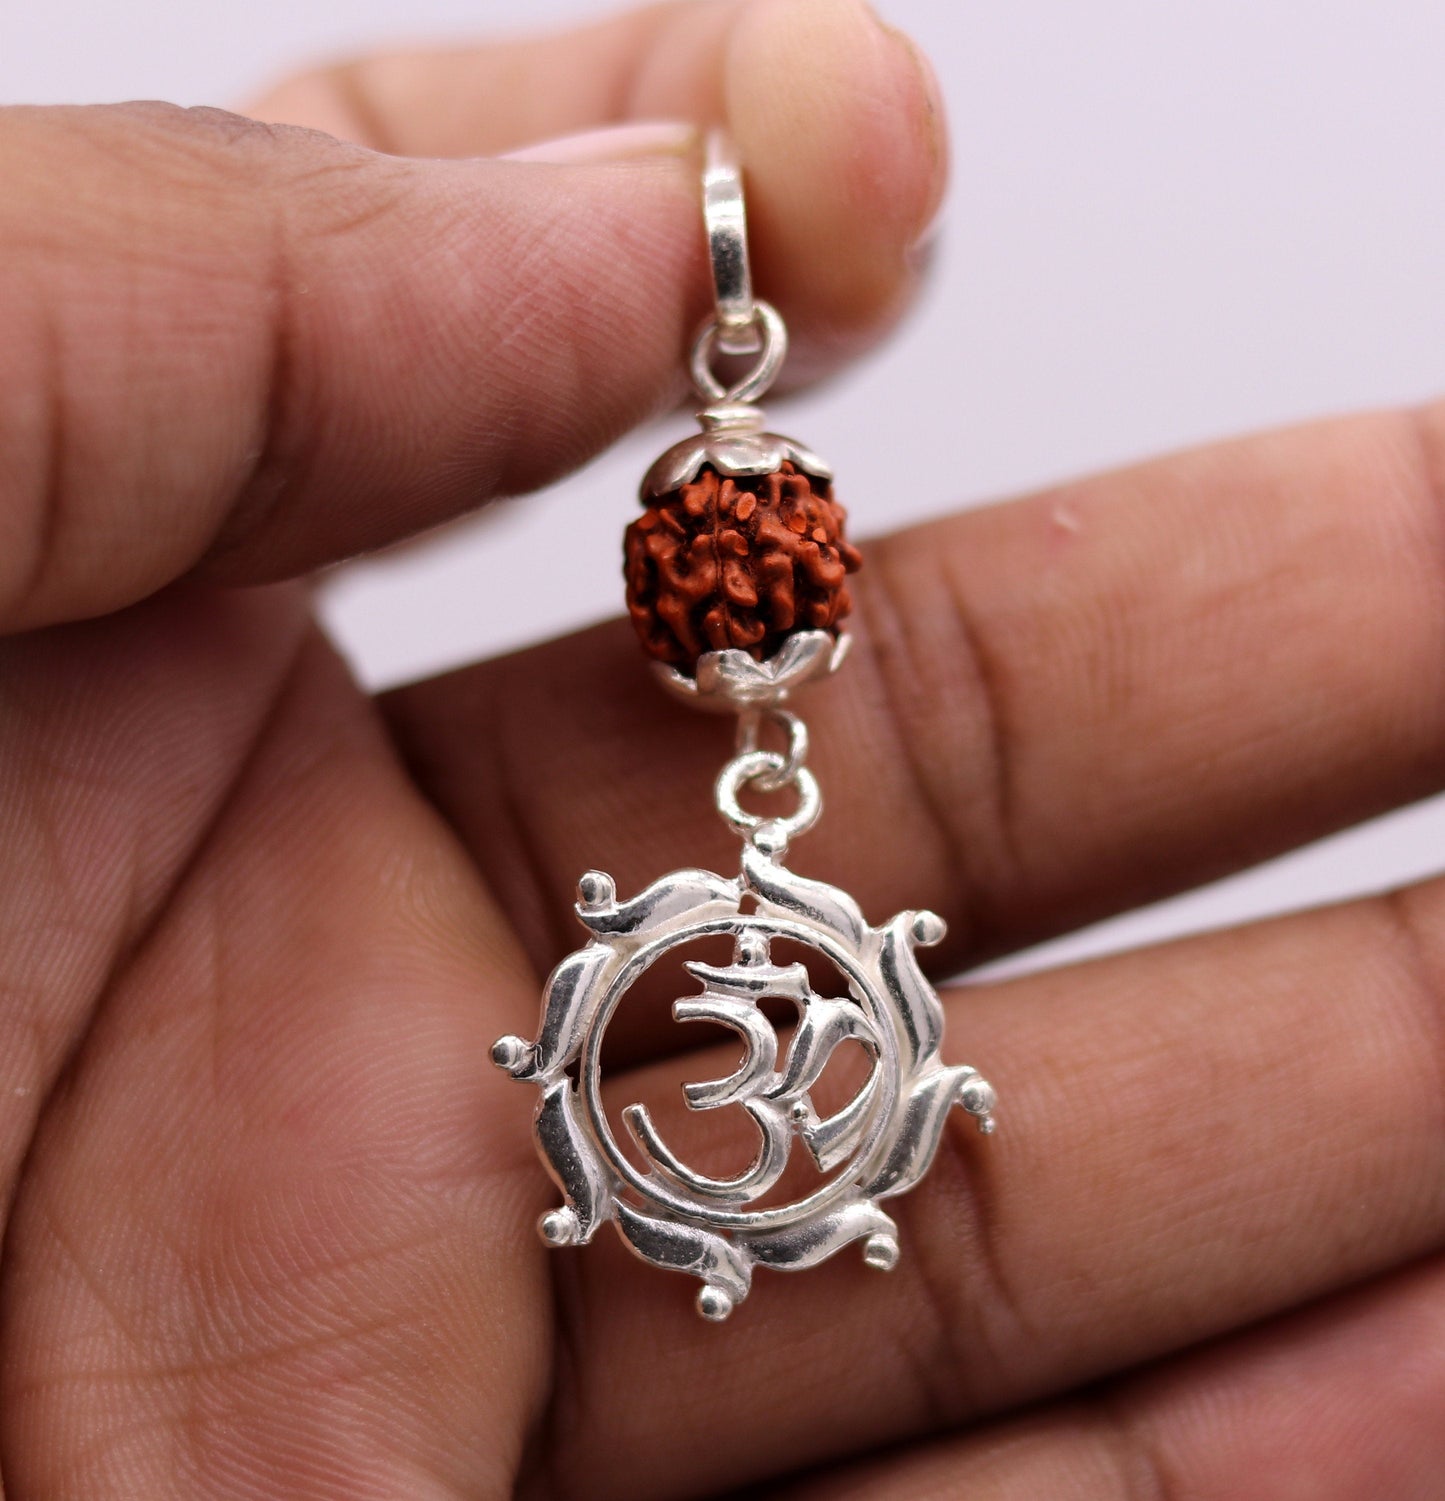 Vintage antique sterling silver handmade fabulous real rudraksha bead with 'aum' pendant unisex jewelry nsp96 - TRIBAL ORNAMENTS